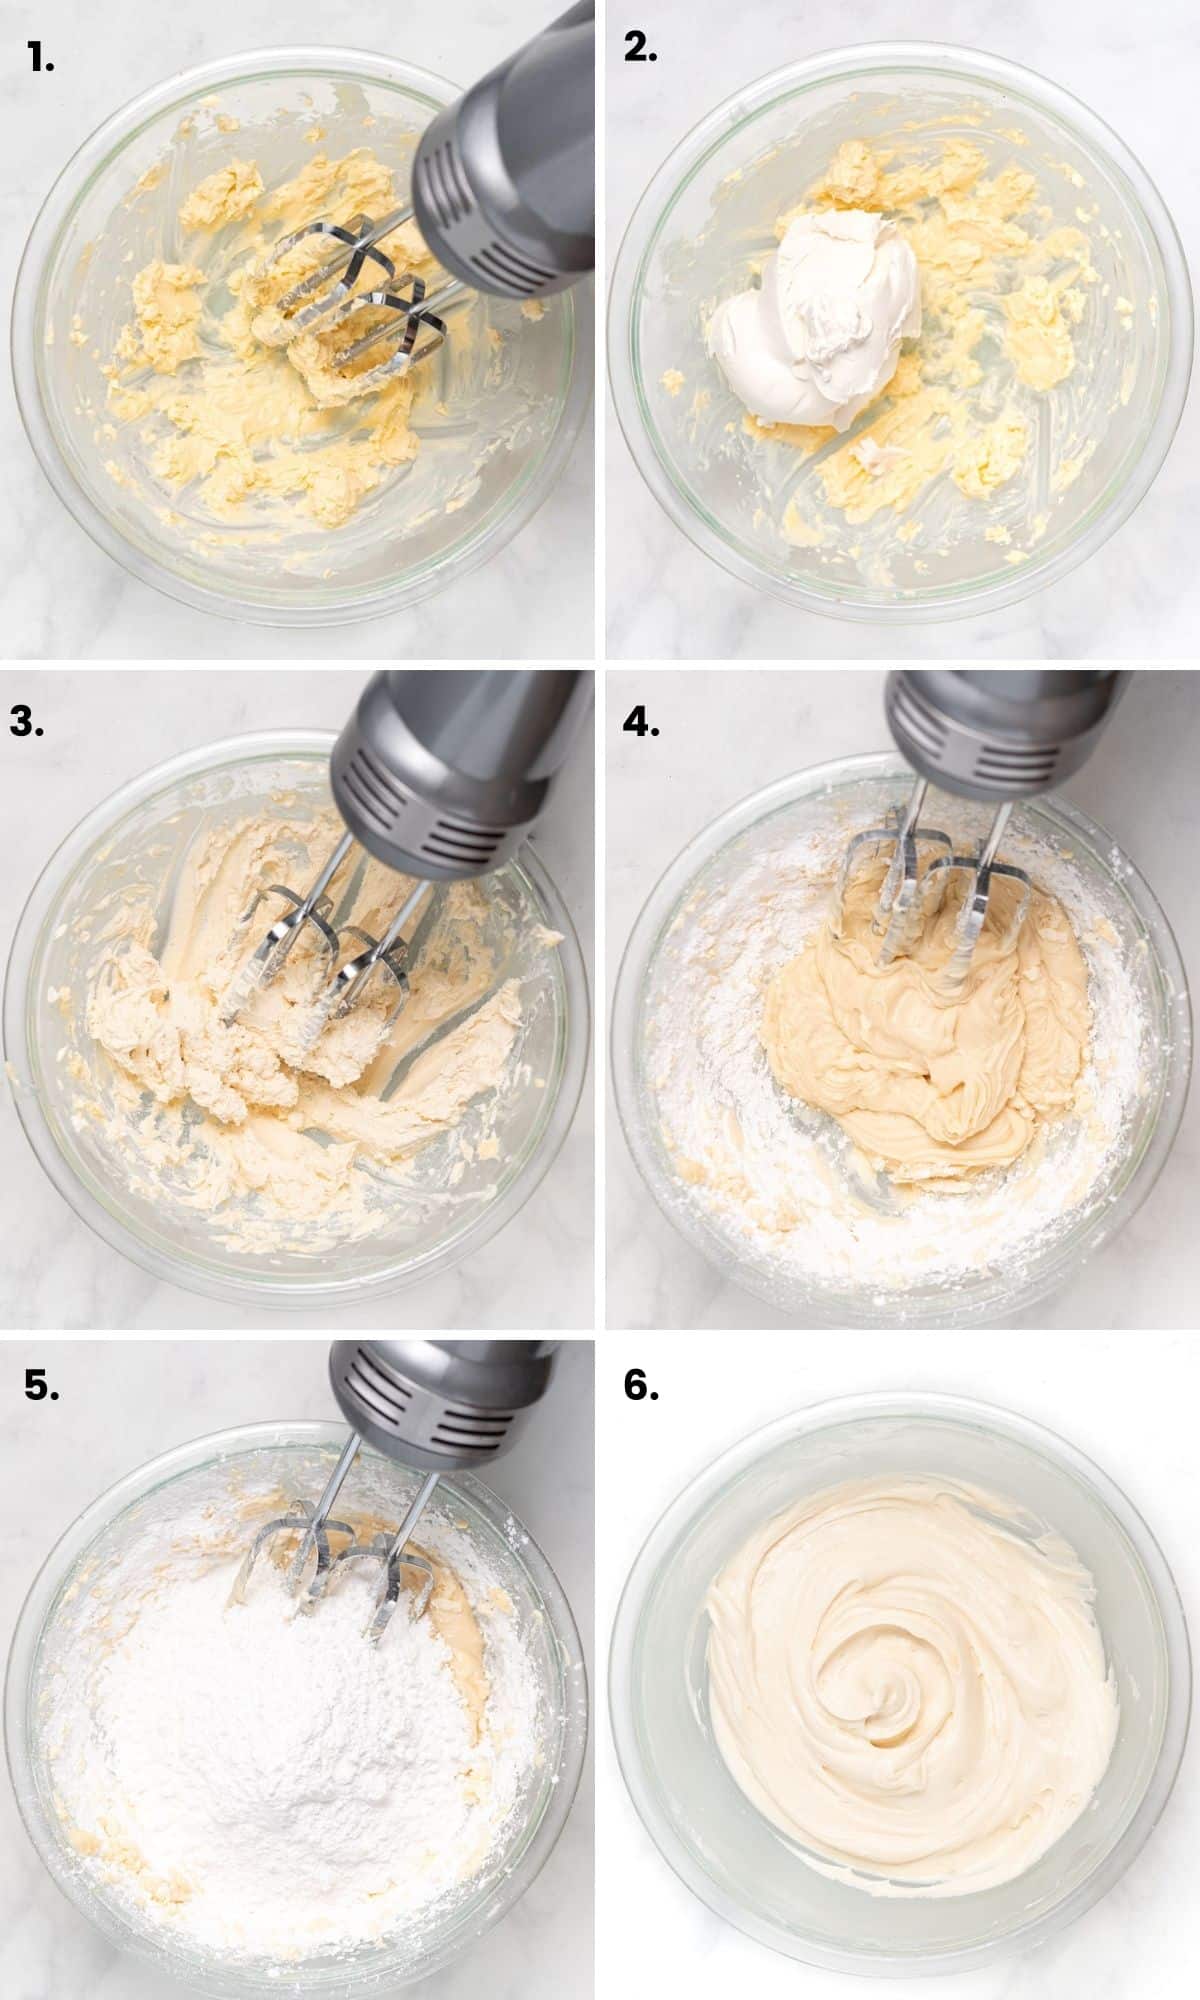 step by step photos showing how to make vegan cream cheese frosting as per the written instructions